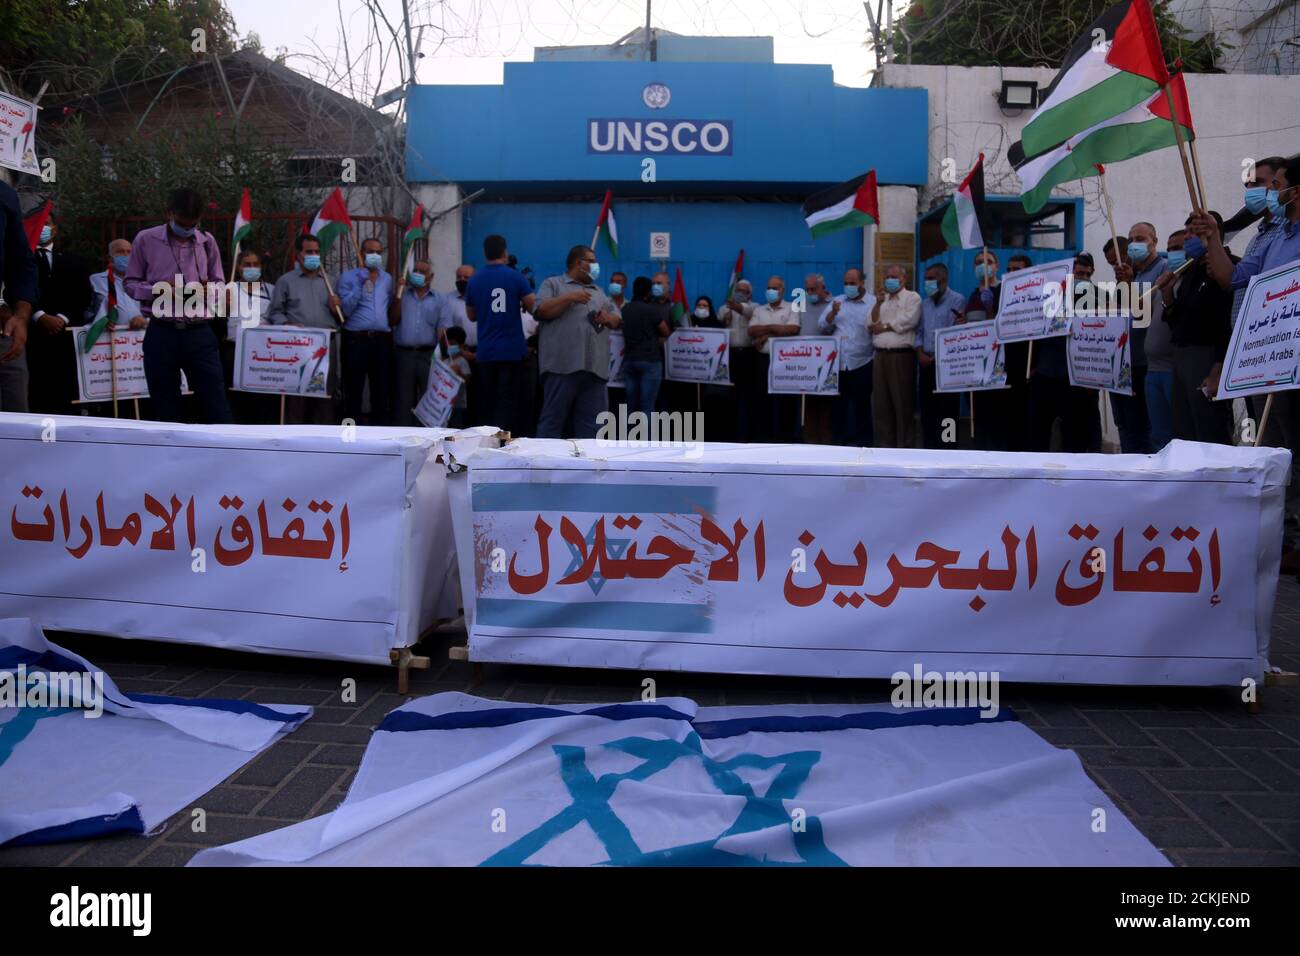 September 15, 2020: Gaza, Palestine.15 September 2020. Palestinians hold a protest outside the UN headquarters in Gaza City as the UAE and Bahrain sign their normalisation agreements with Israel in Washington. Protesters burnt the Israeli flag and  carried banners denouncing the deal as ''the deal of shame'', and the normalisation of ties as a betrayal by the Arab states. While the White House has described the accords as a ''declaration of peace'', Palestinians have fully rejected them as they feel even more isolated in resisting the Israeli occupation, while their leaders have called for a l Stock Photo